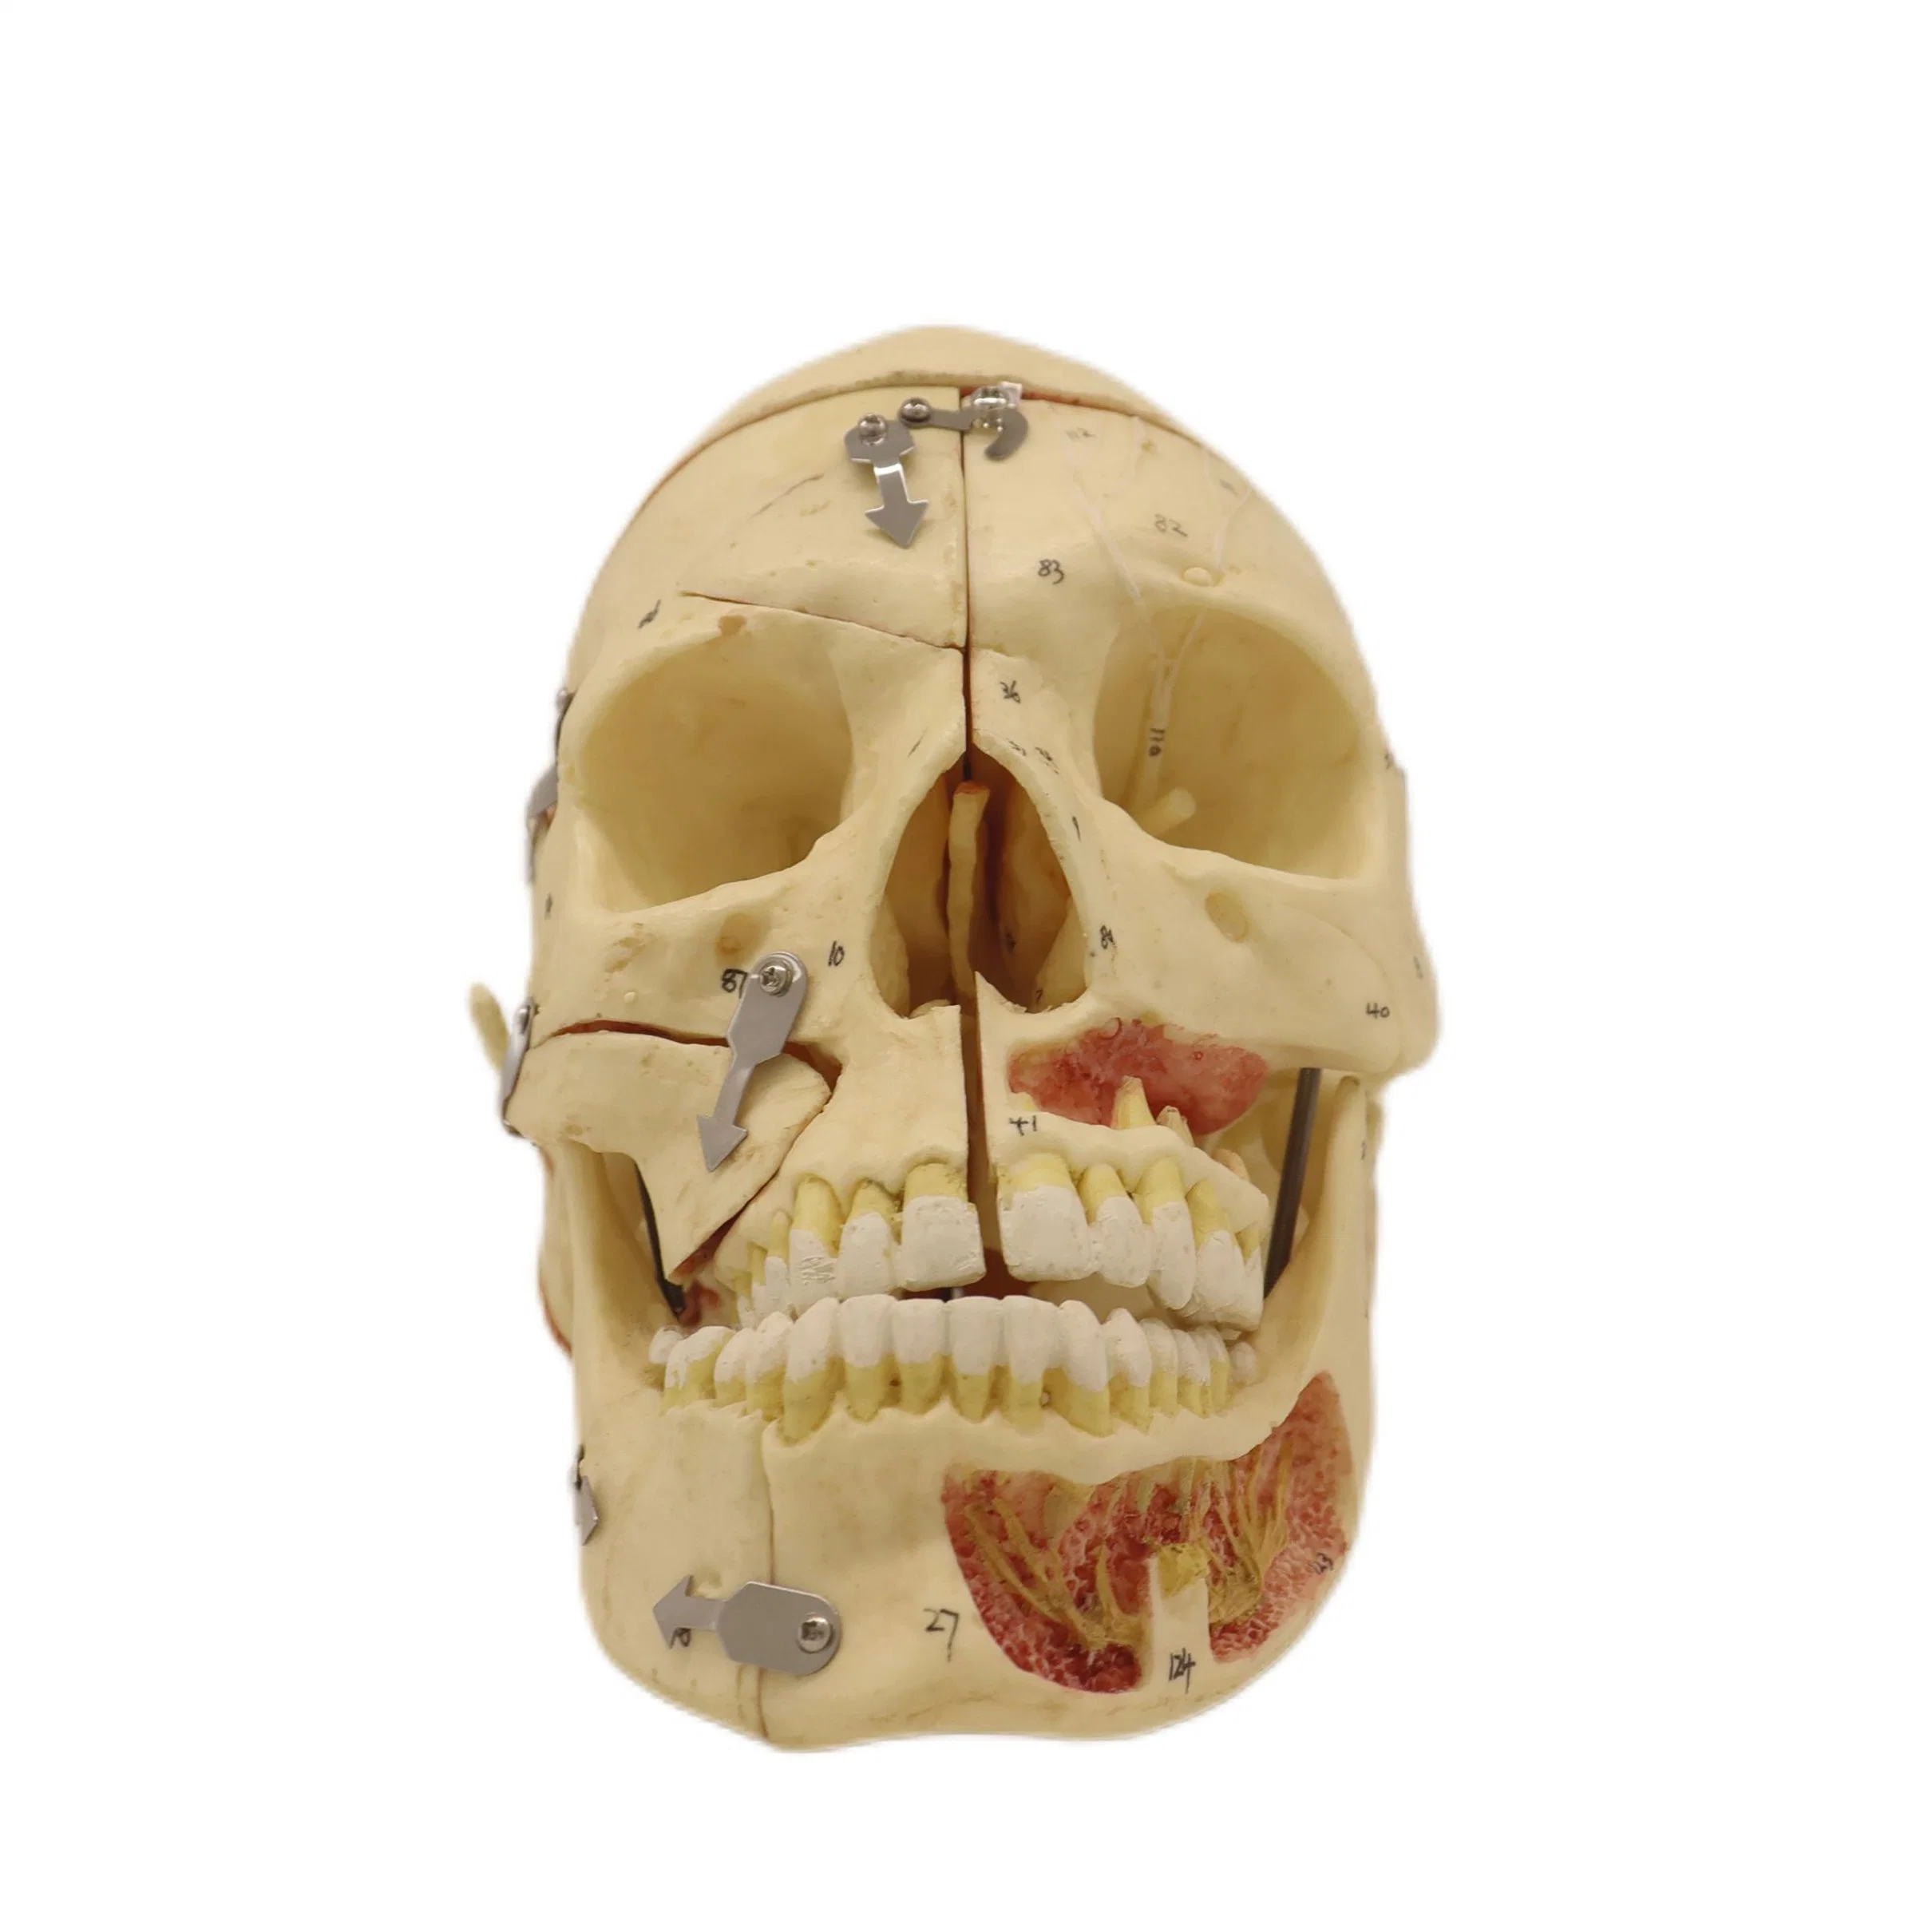 Good Quality of Medical Teaching Anatomical Model of Adult Skull with Blood Vessels and Nerves